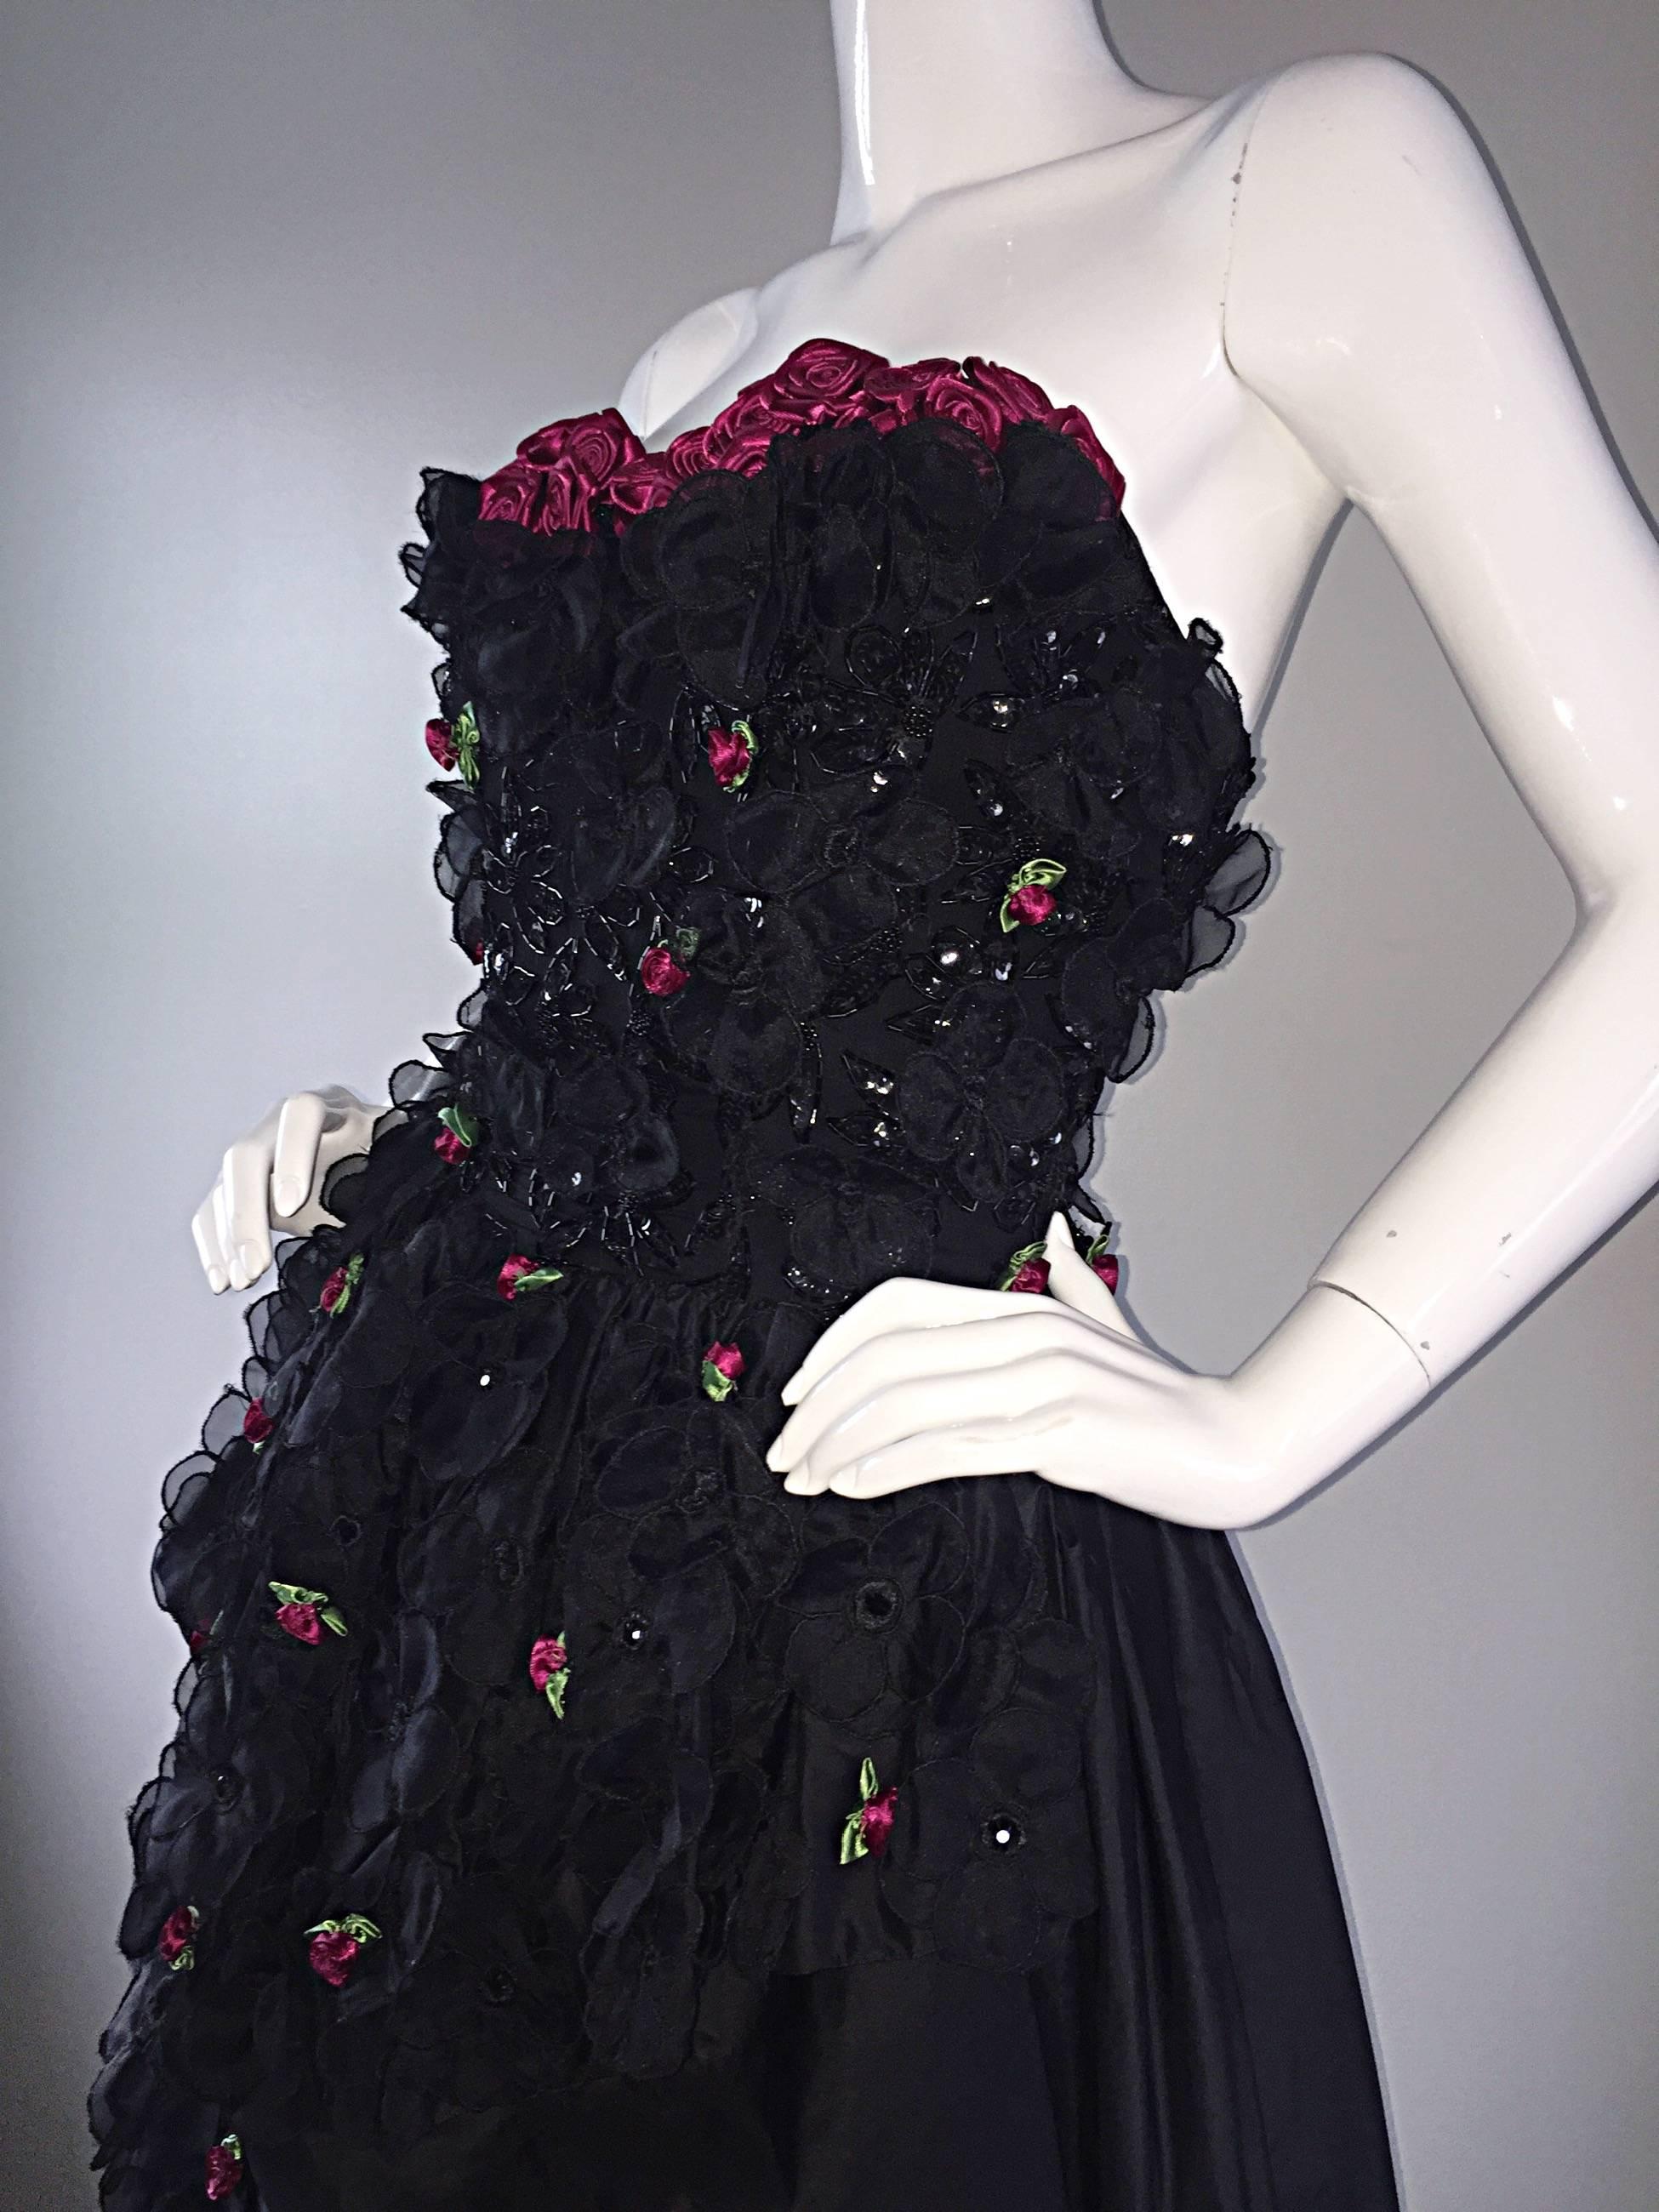 Exceptional 1950s Vintage Black Silk Taffeta Hi - Lo Dress w/ Rosettes and Lace In Excellent Condition For Sale In San Diego, CA